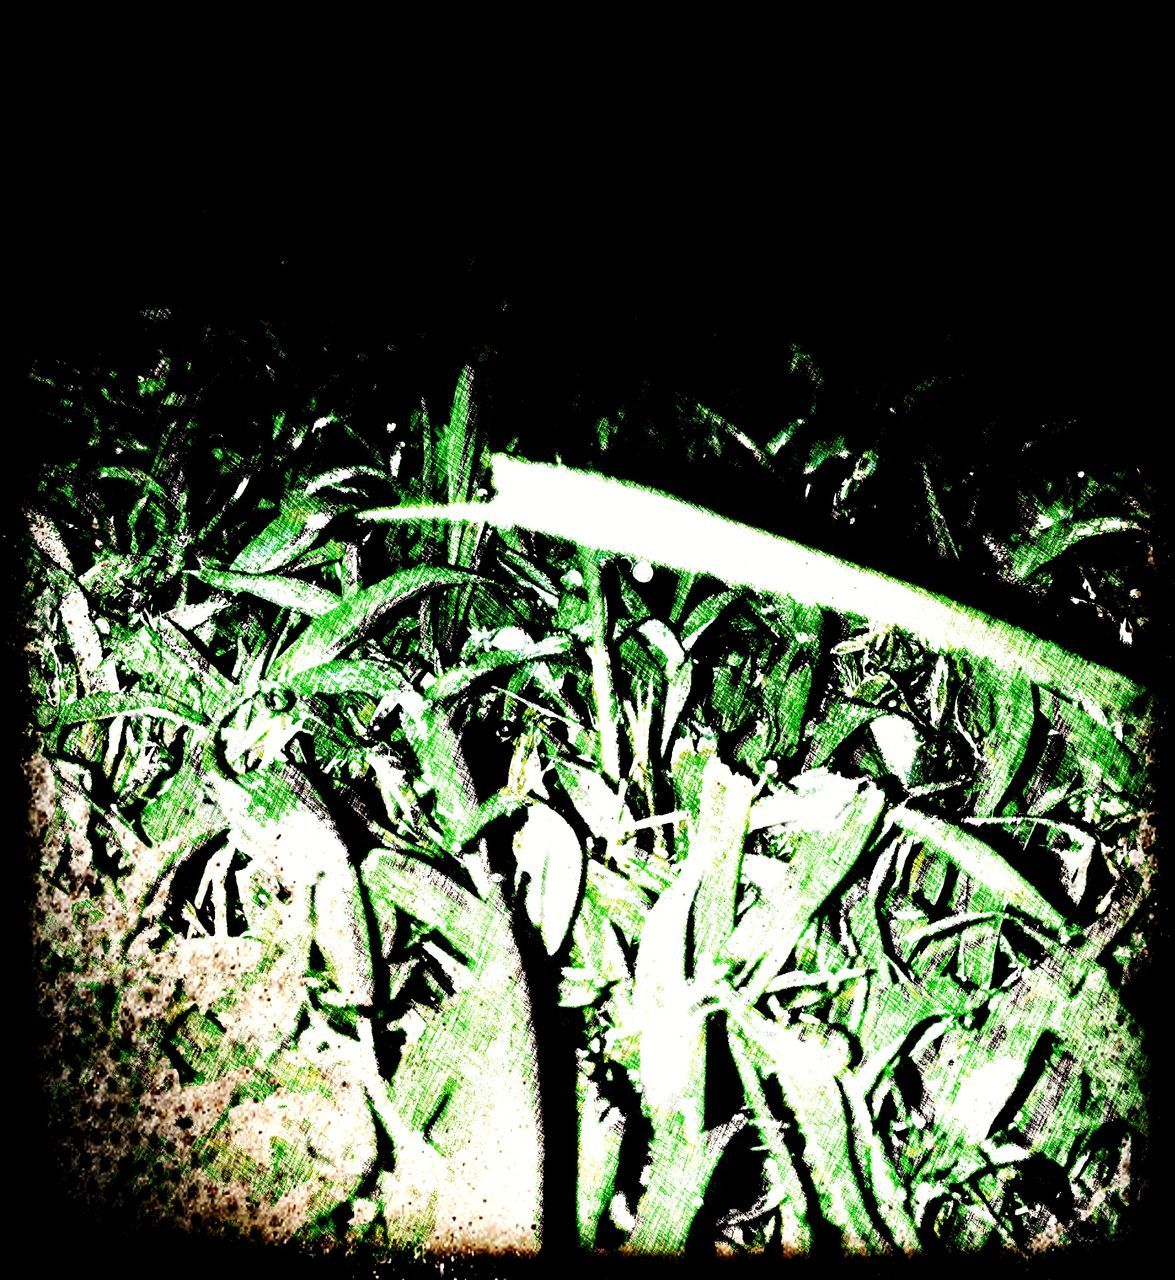 CLOSE-UP OF PLANTS AGAINST BLACK BACKGROUND AT NIGHT